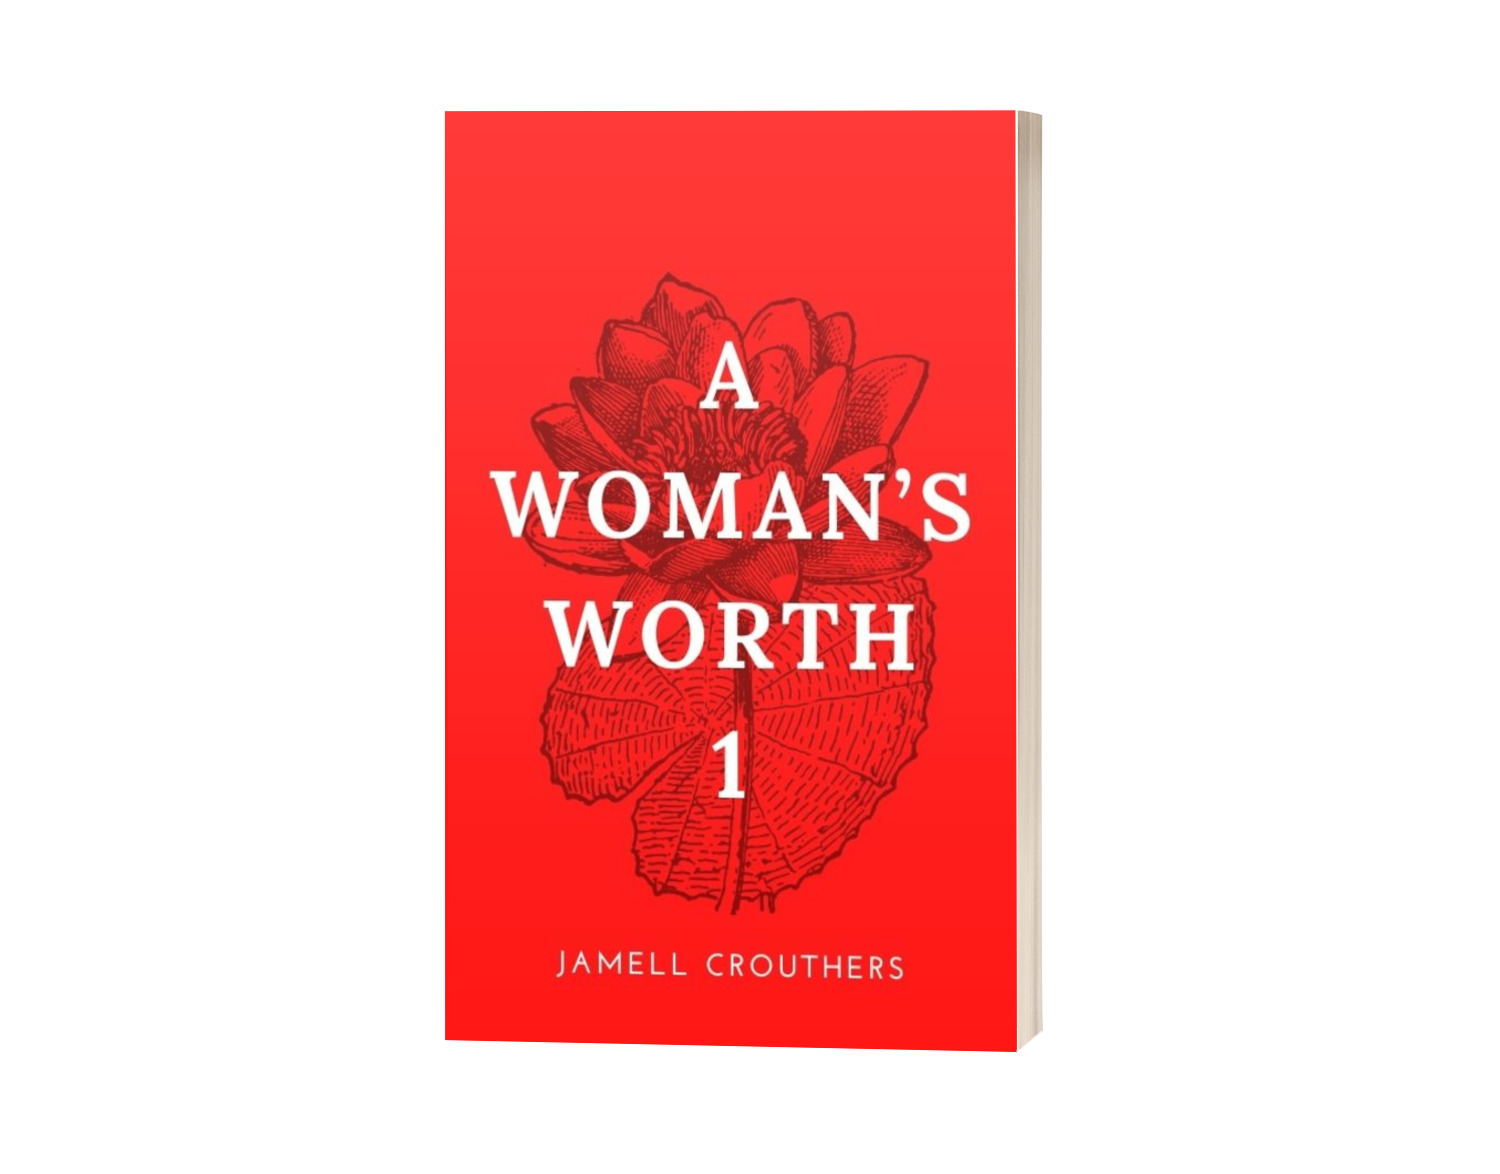 Writing "A Woman's Worth 1"